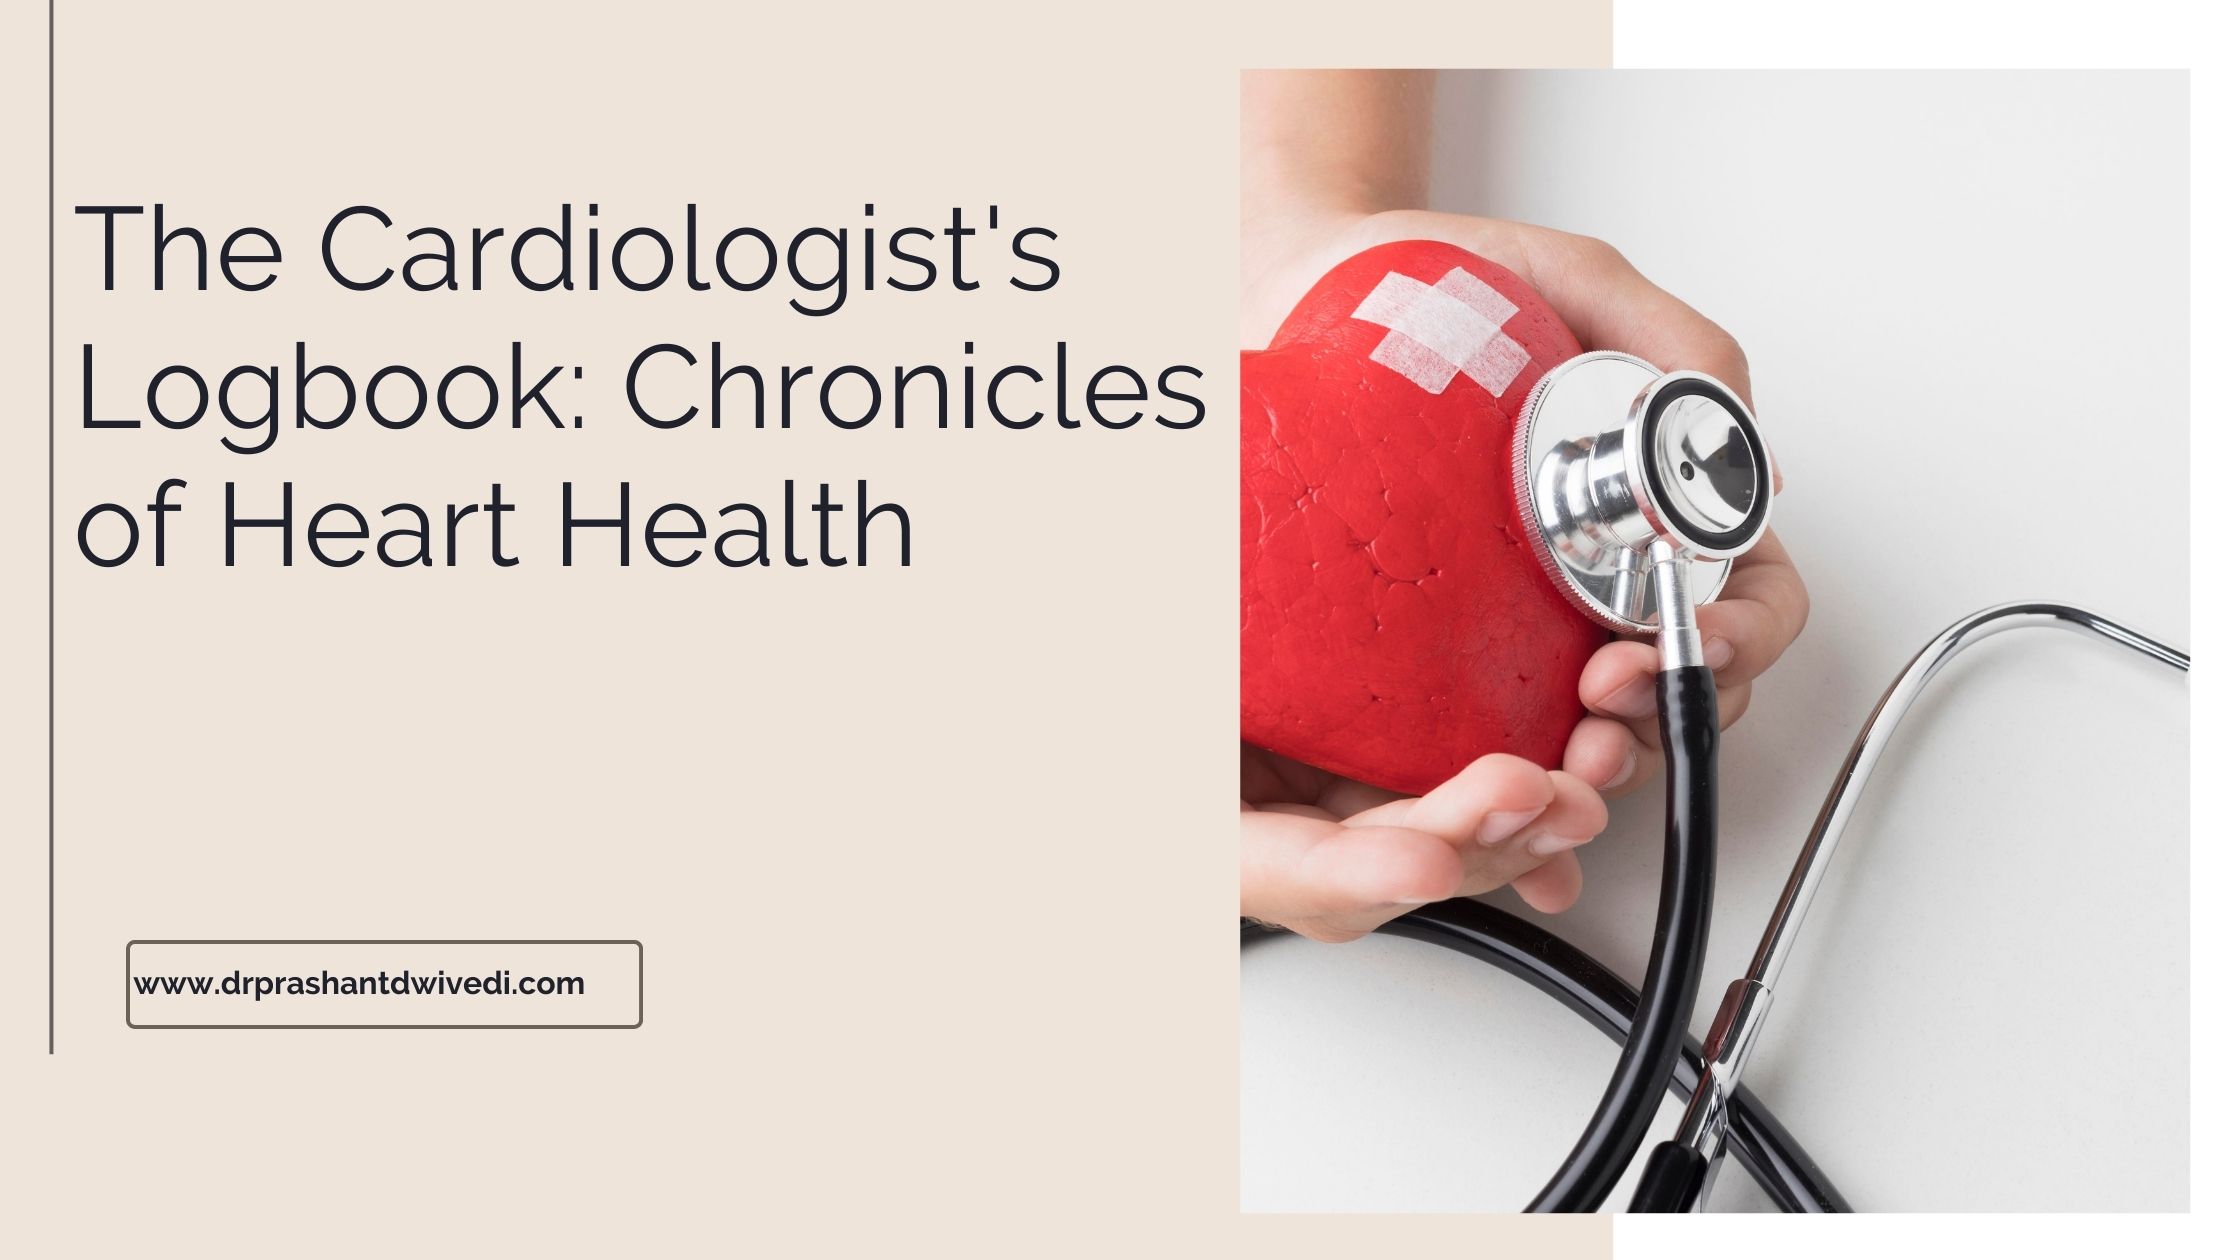 The Cardiologist's Logbook: Chronicles of Heart Health